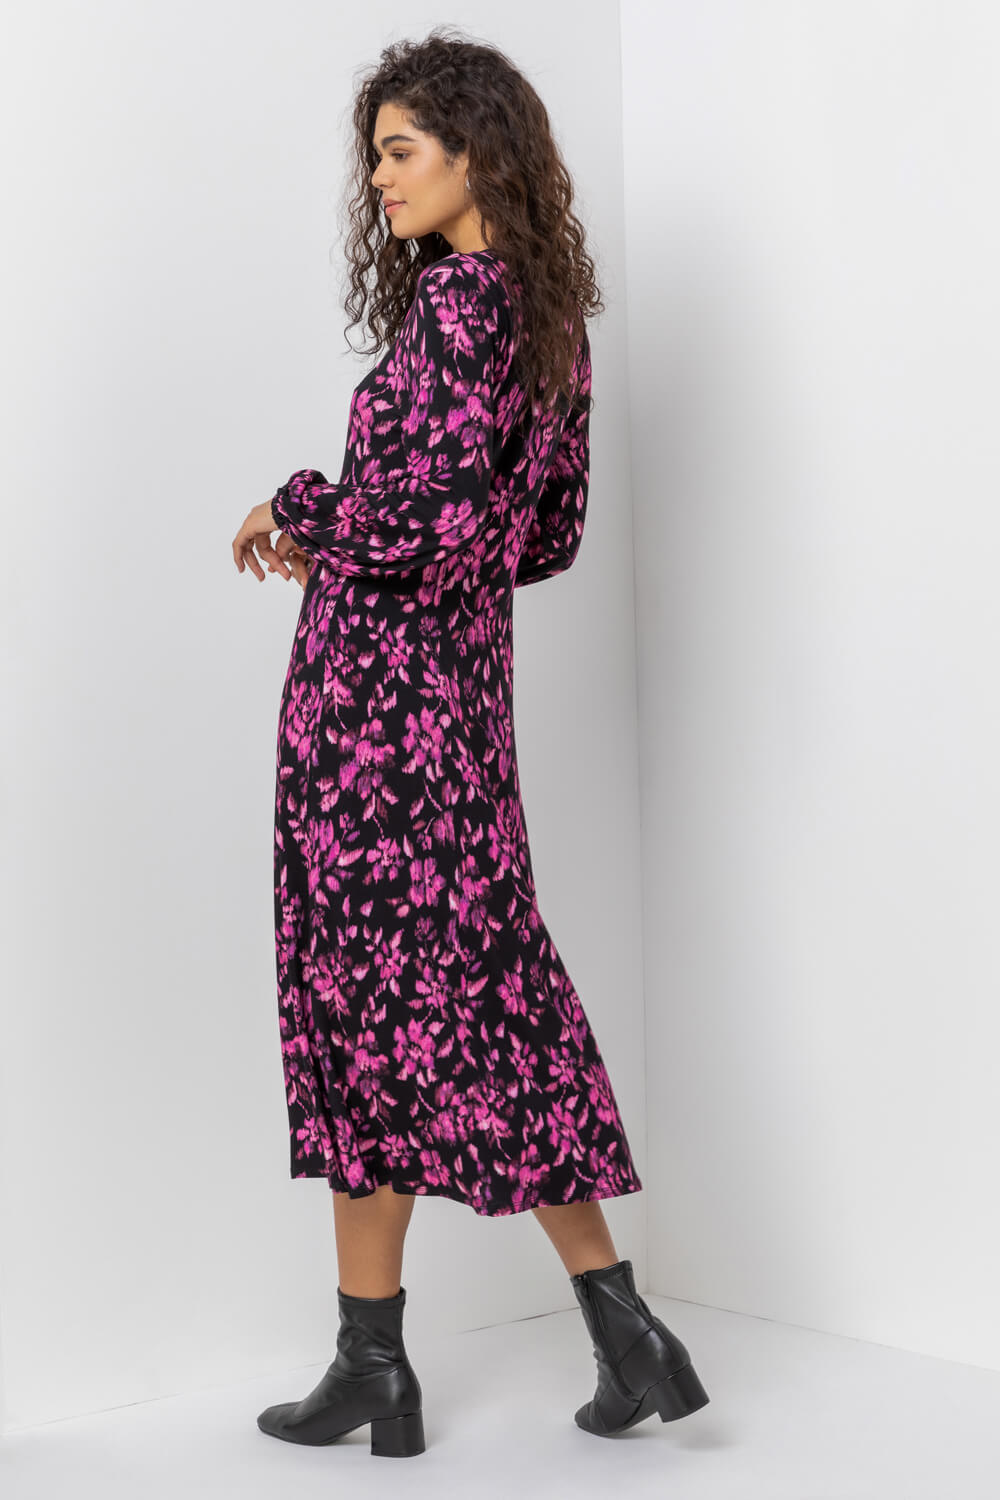 Purple Abstract Floral Fit & Flare Midi Dress, Image 2 of 5